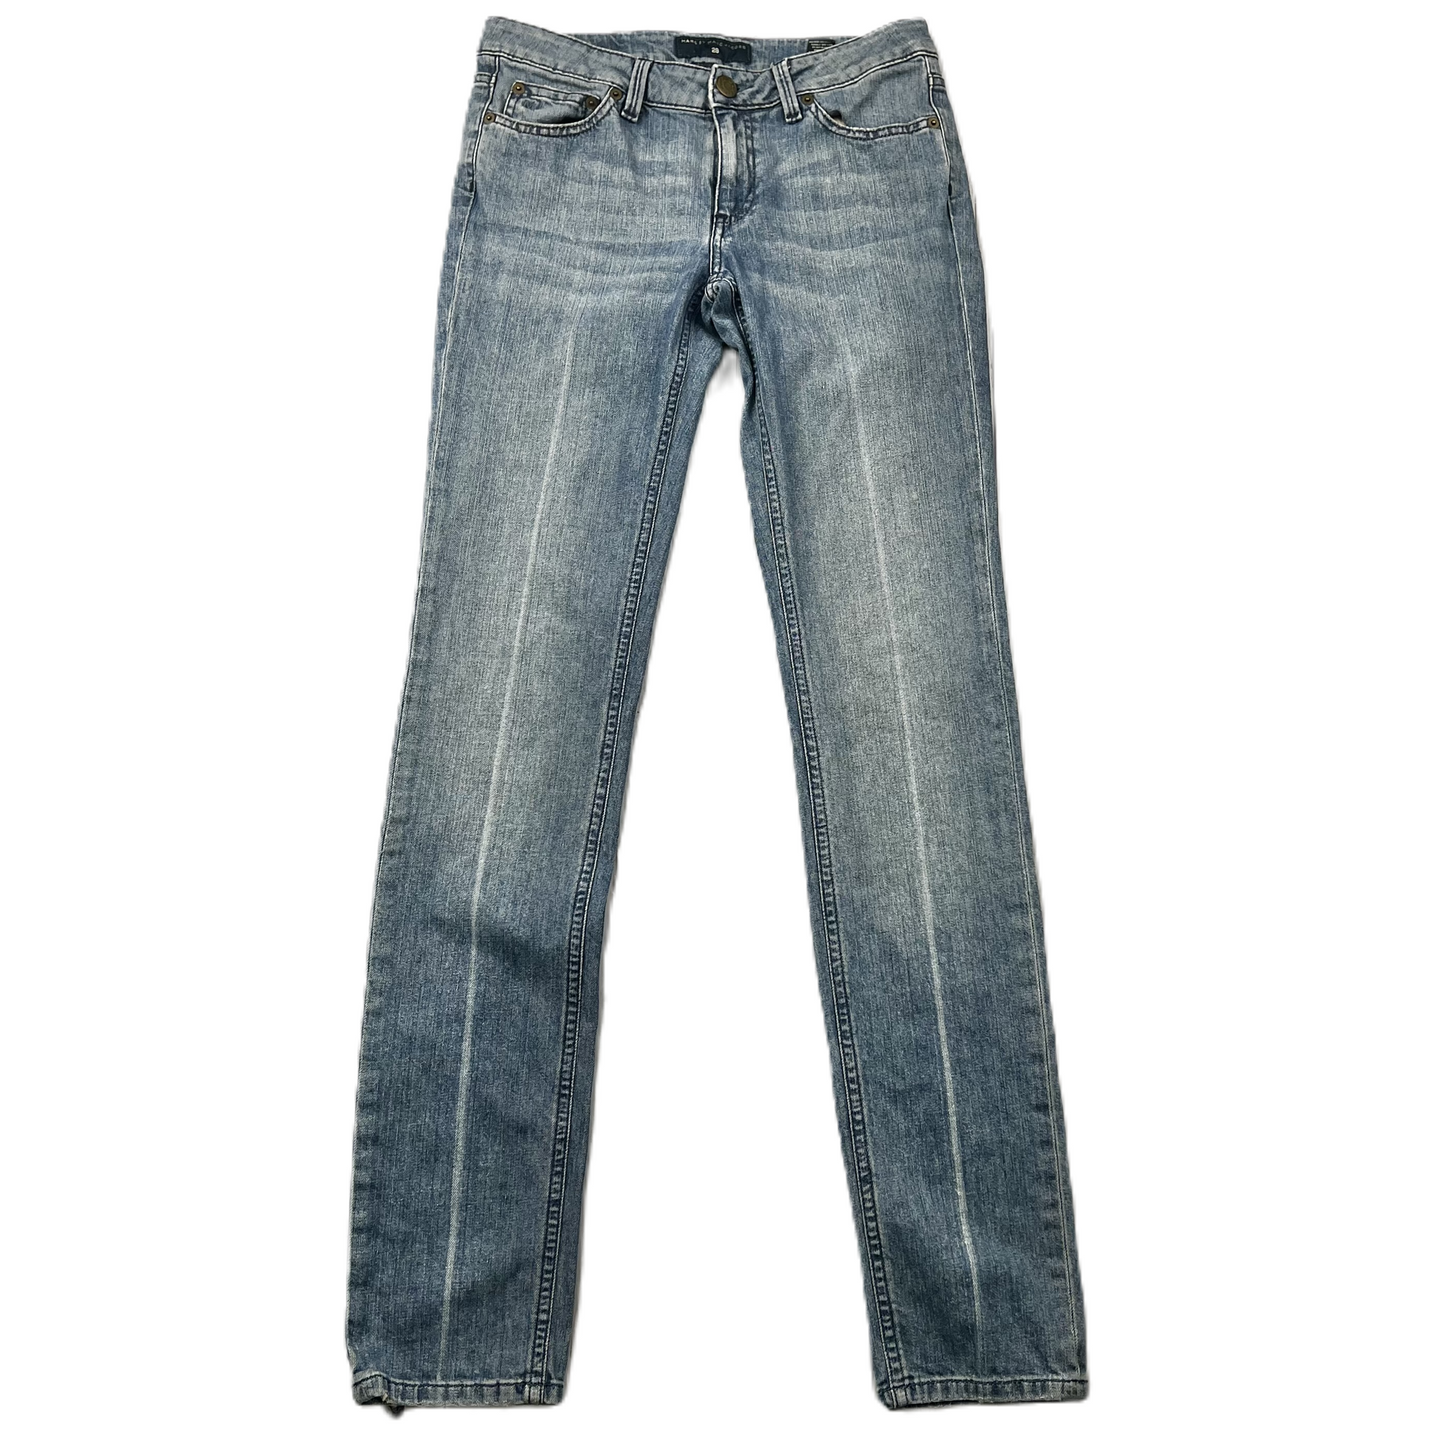 Blue Denim Jeans Straight By Marc By Marc Jacobs, Size: 6